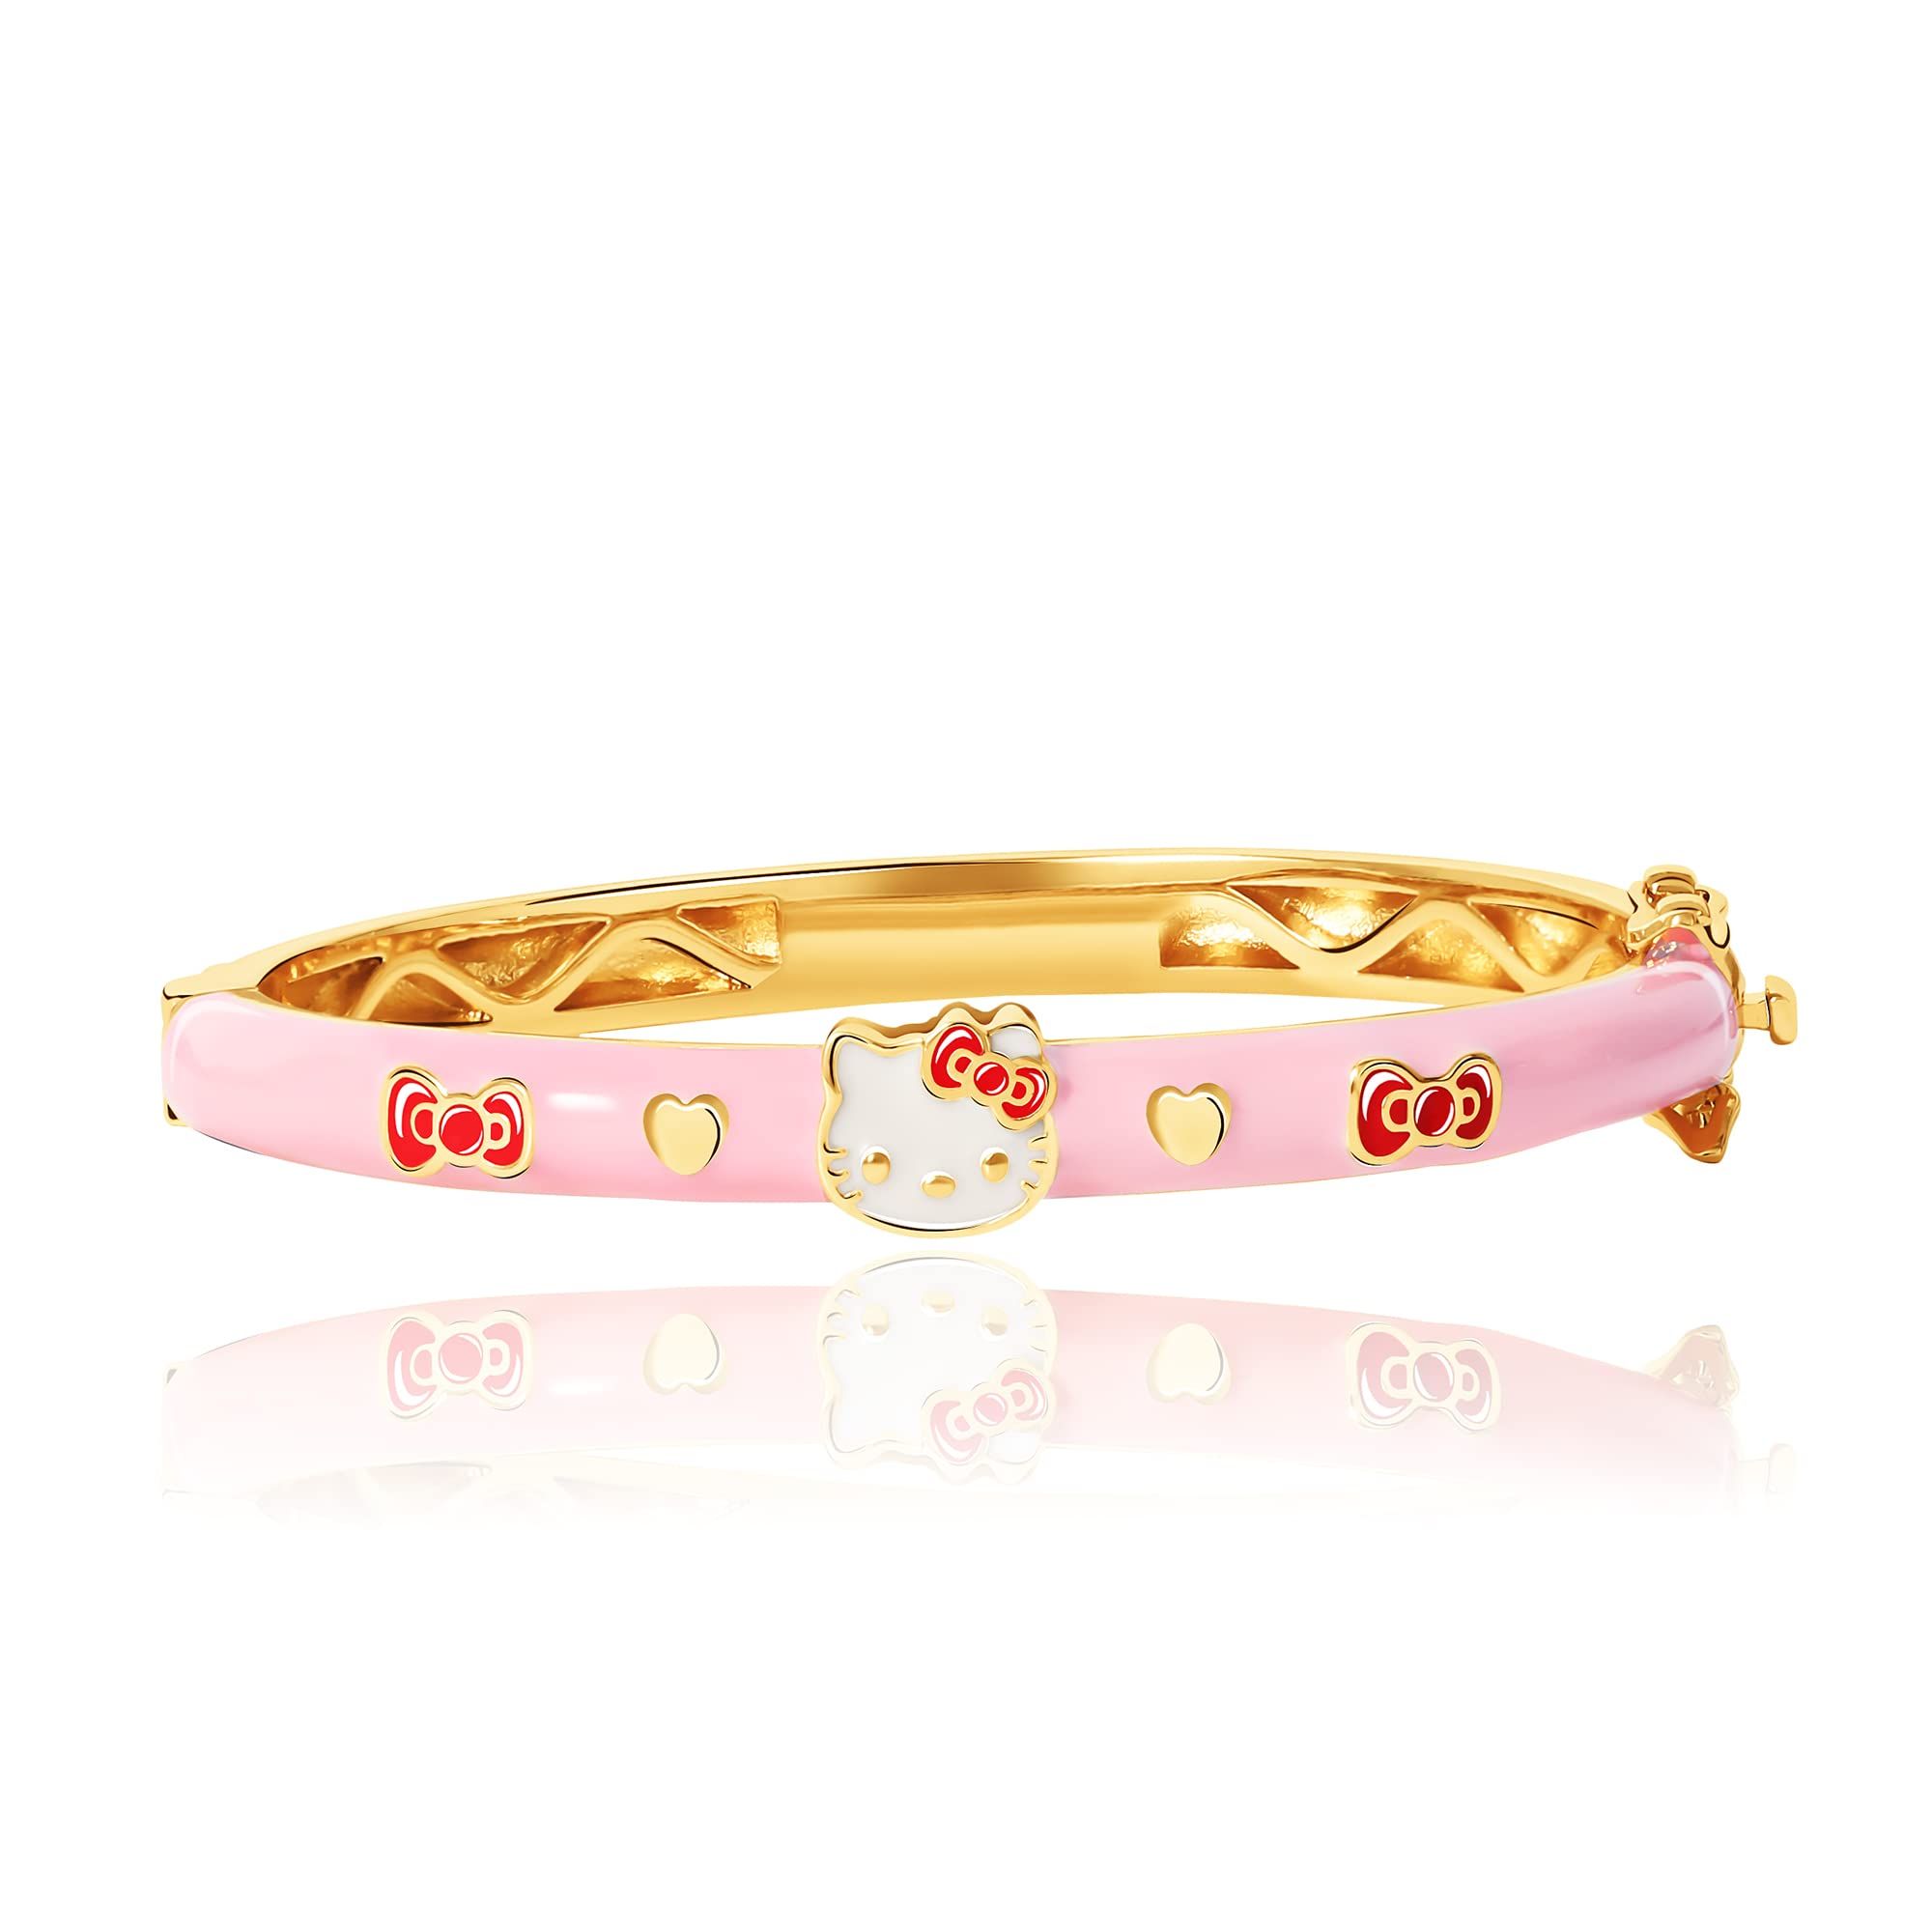 Pink Bangles: Fun and Vibrant Accessories to Add a Pop of Color